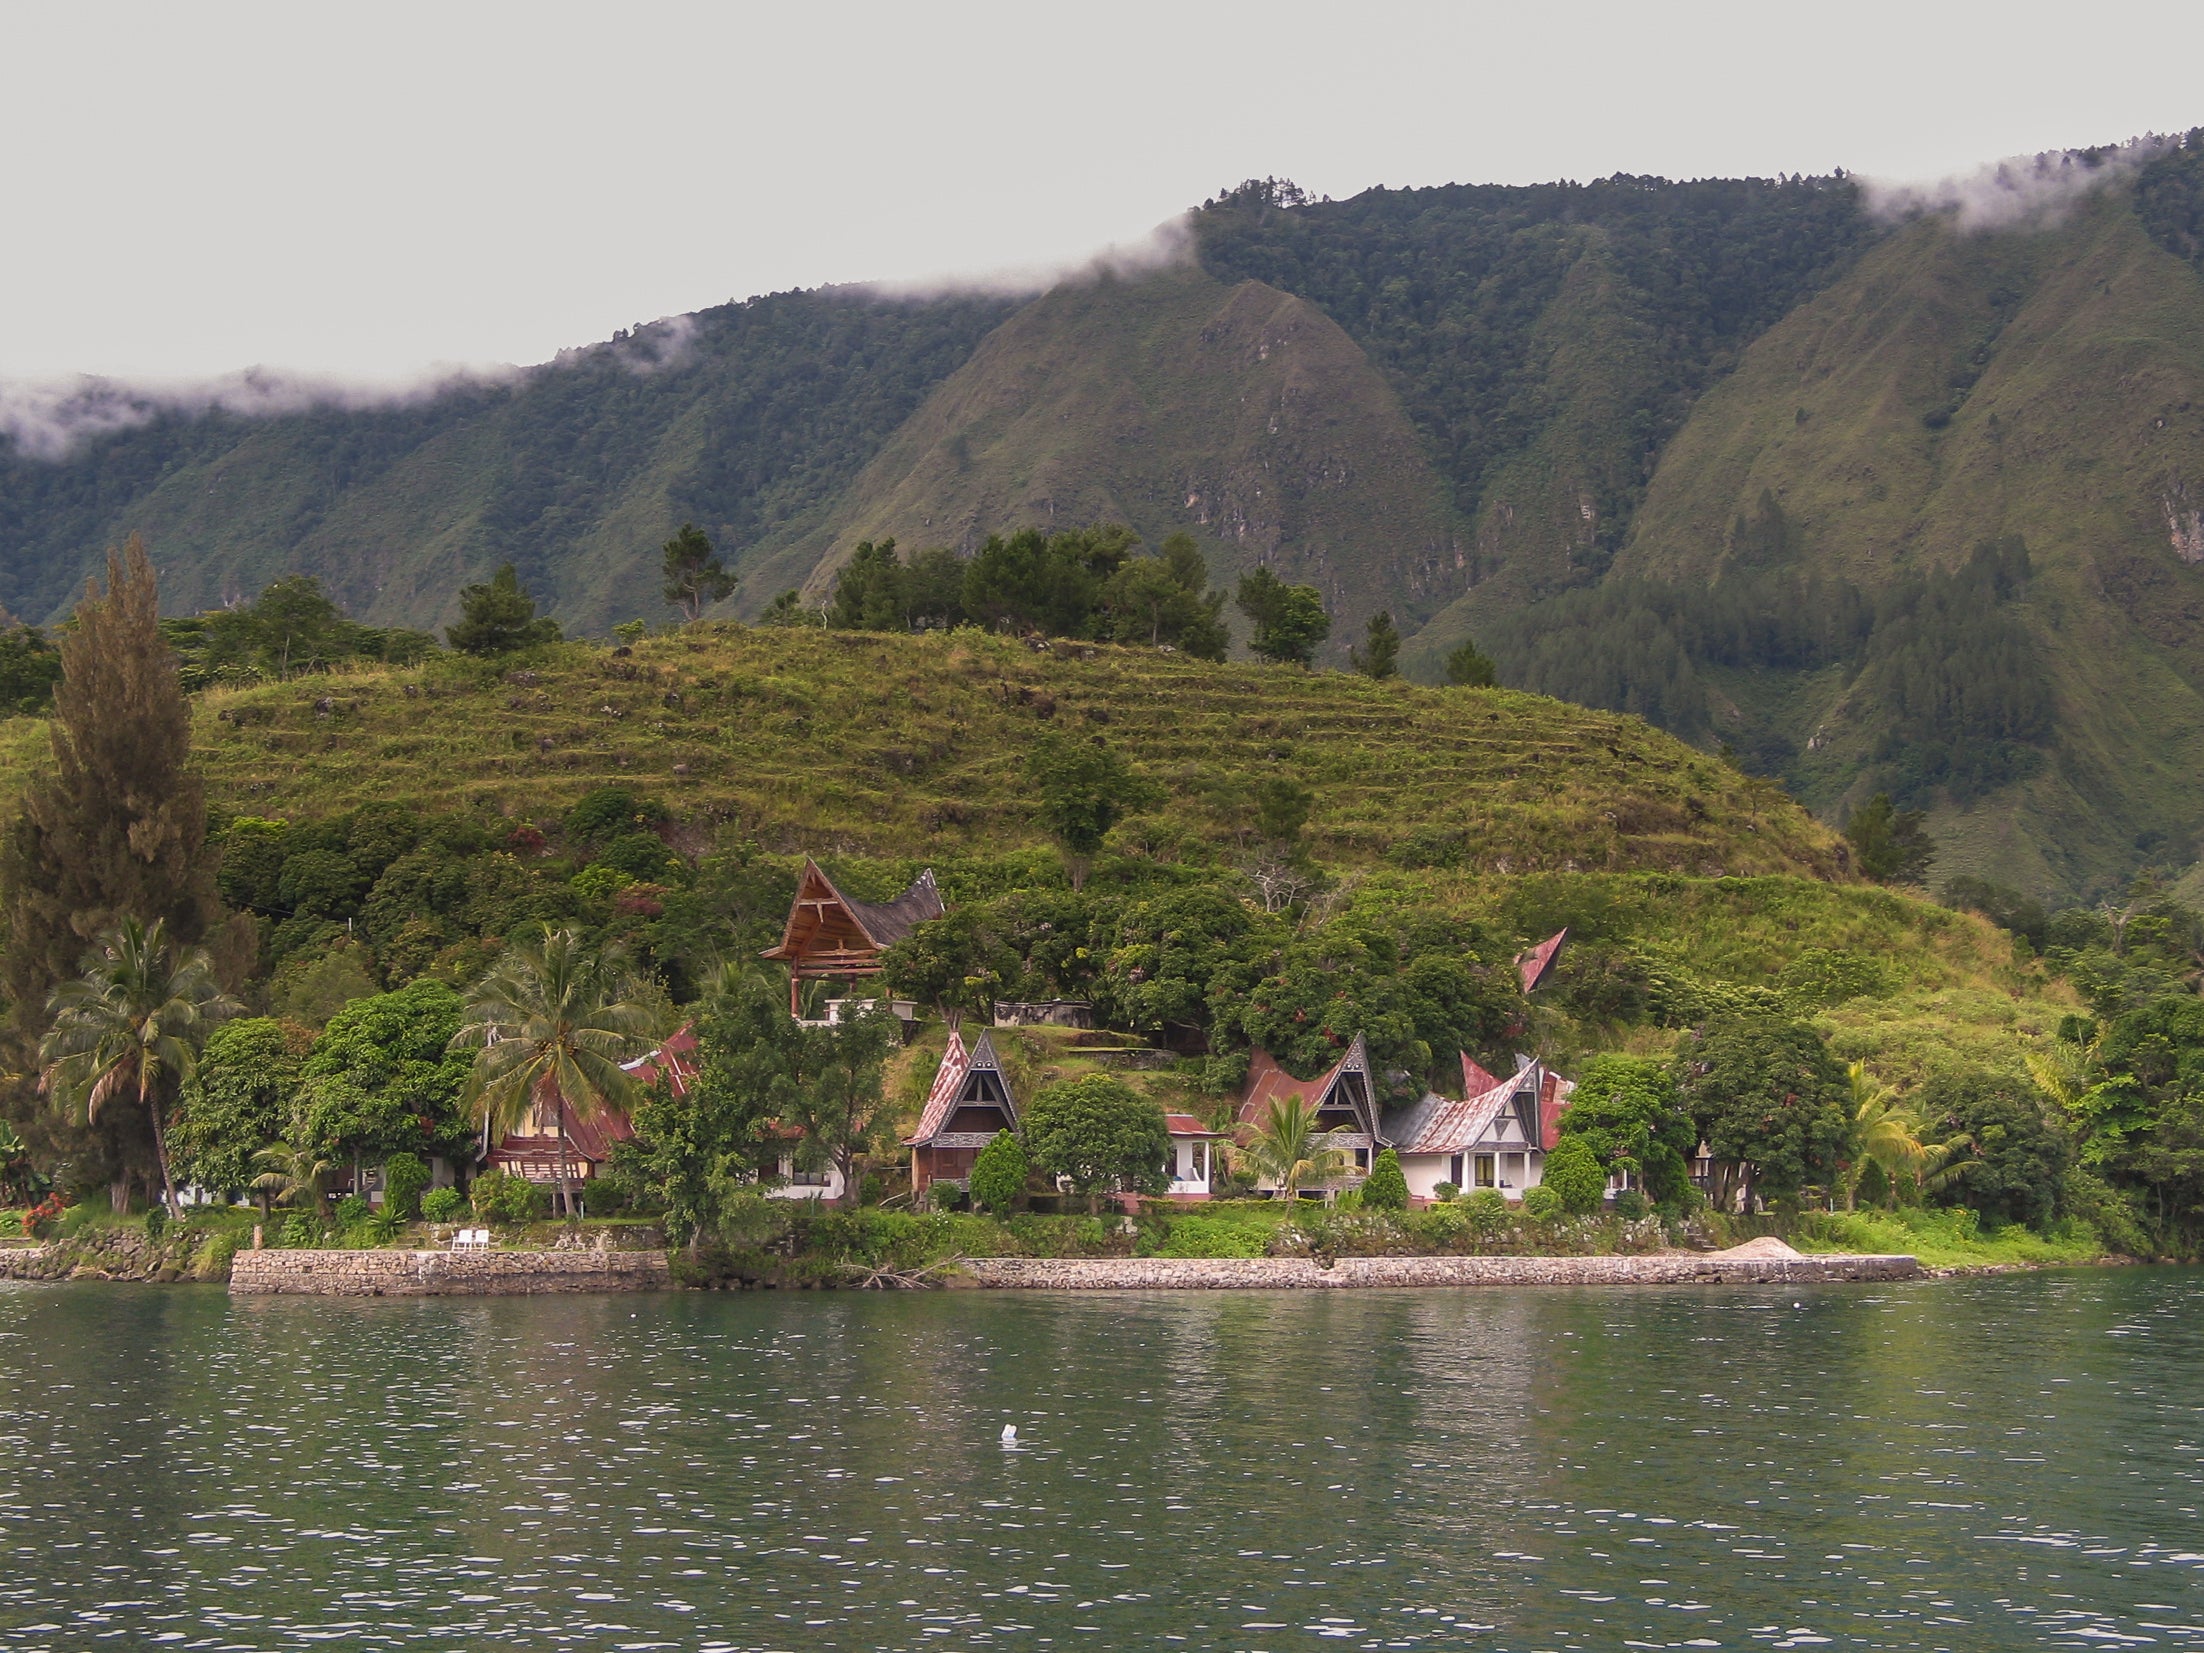 Lake Toba, on northern Sumatra, was formed by the volcano's eruption 74,000 years ago